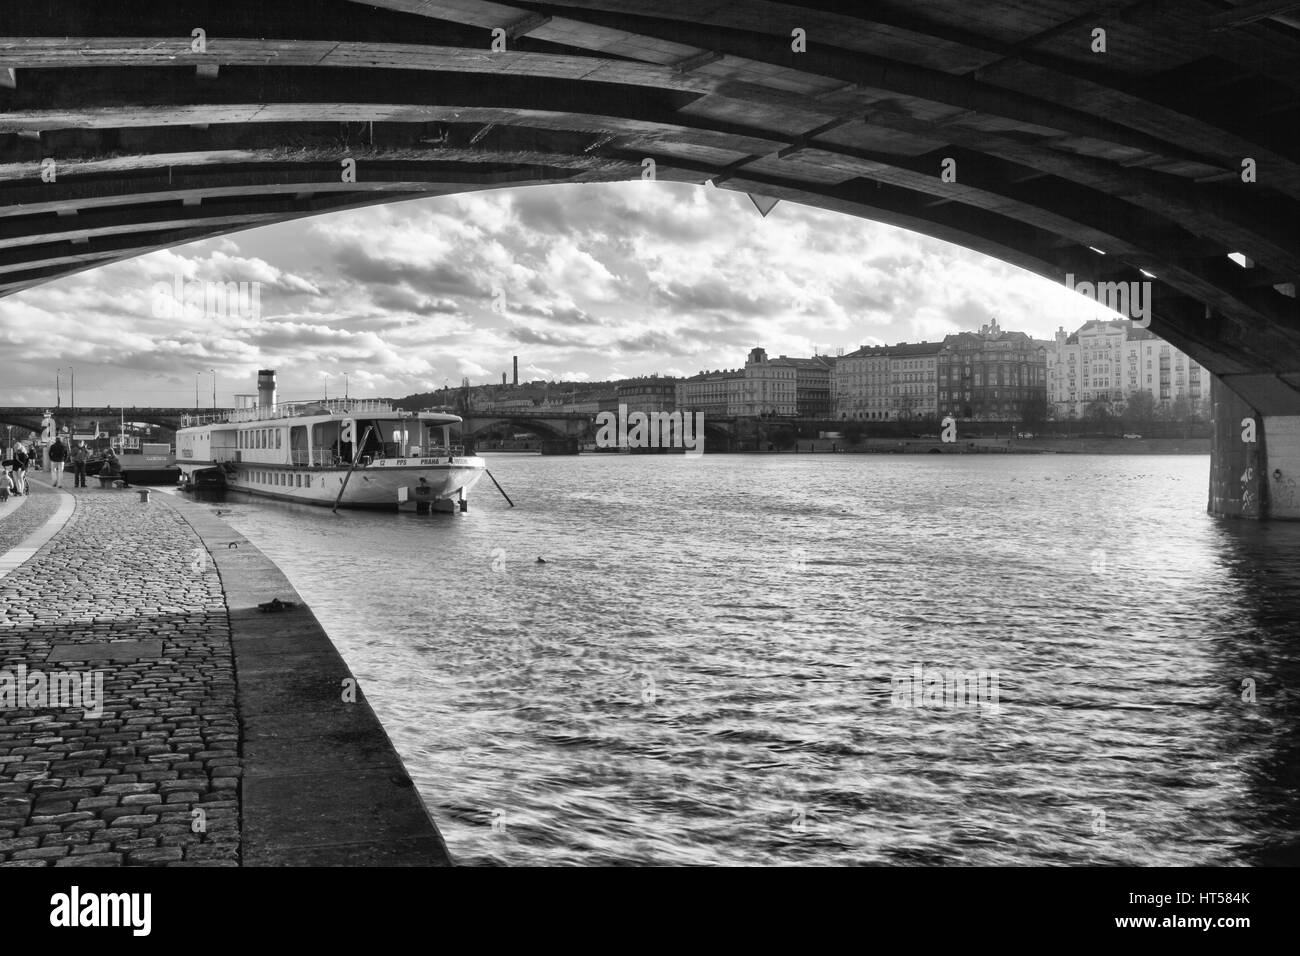 Prague,Czech Republic - March 3,2017: View on the Vysehrad boat under the bridge after rain.Vyšehrad is one of the last two remaining operating steamb Stock Photo